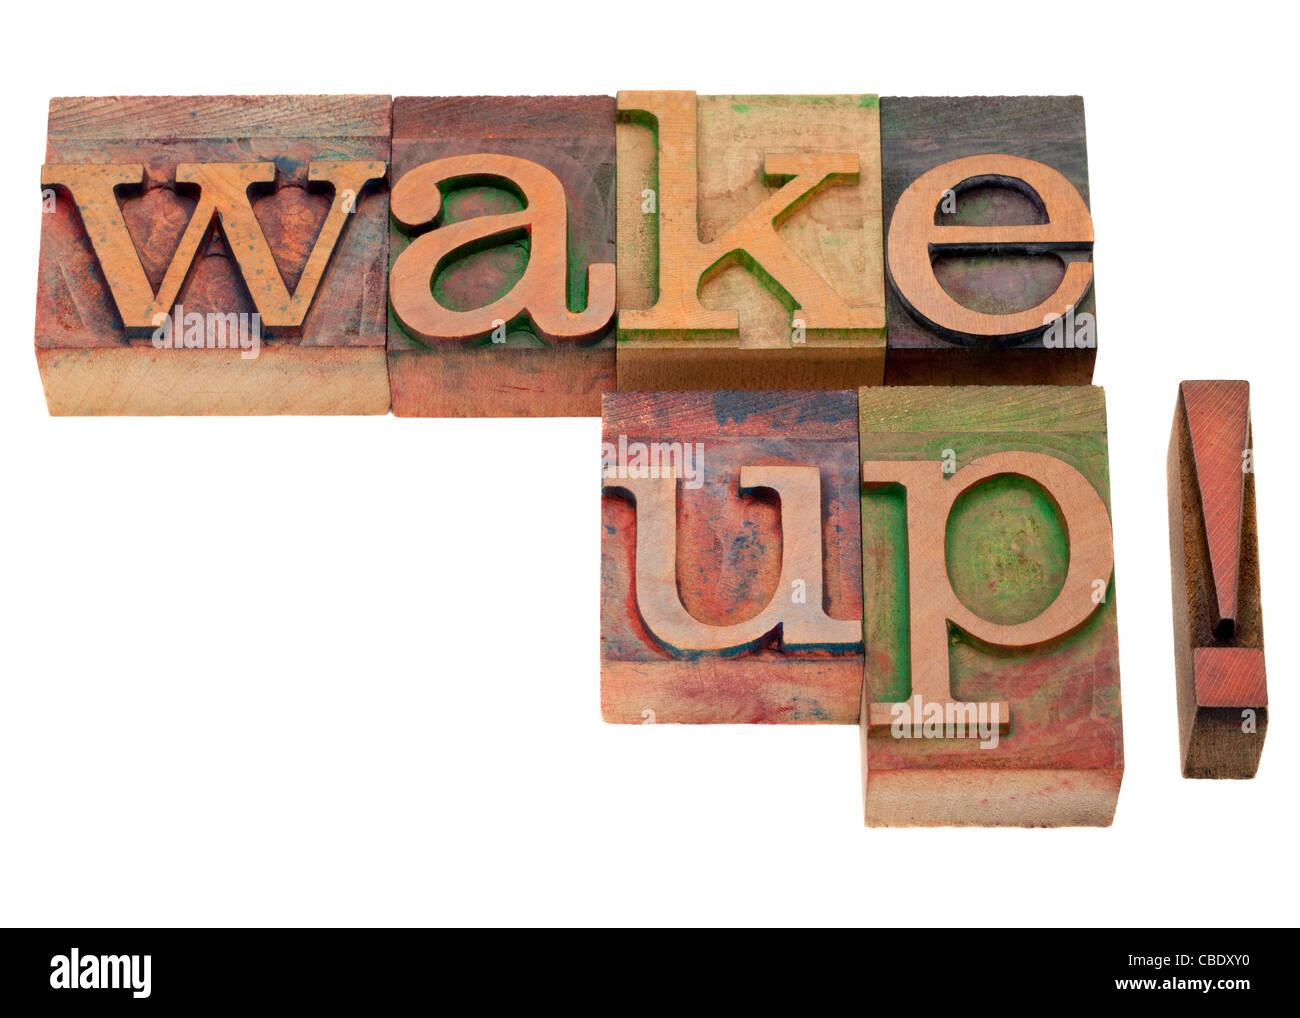 wake up - exclamation phrase in vintage wooden letterpress printing blocks, stained by color inks, isolated on white Stock Photo